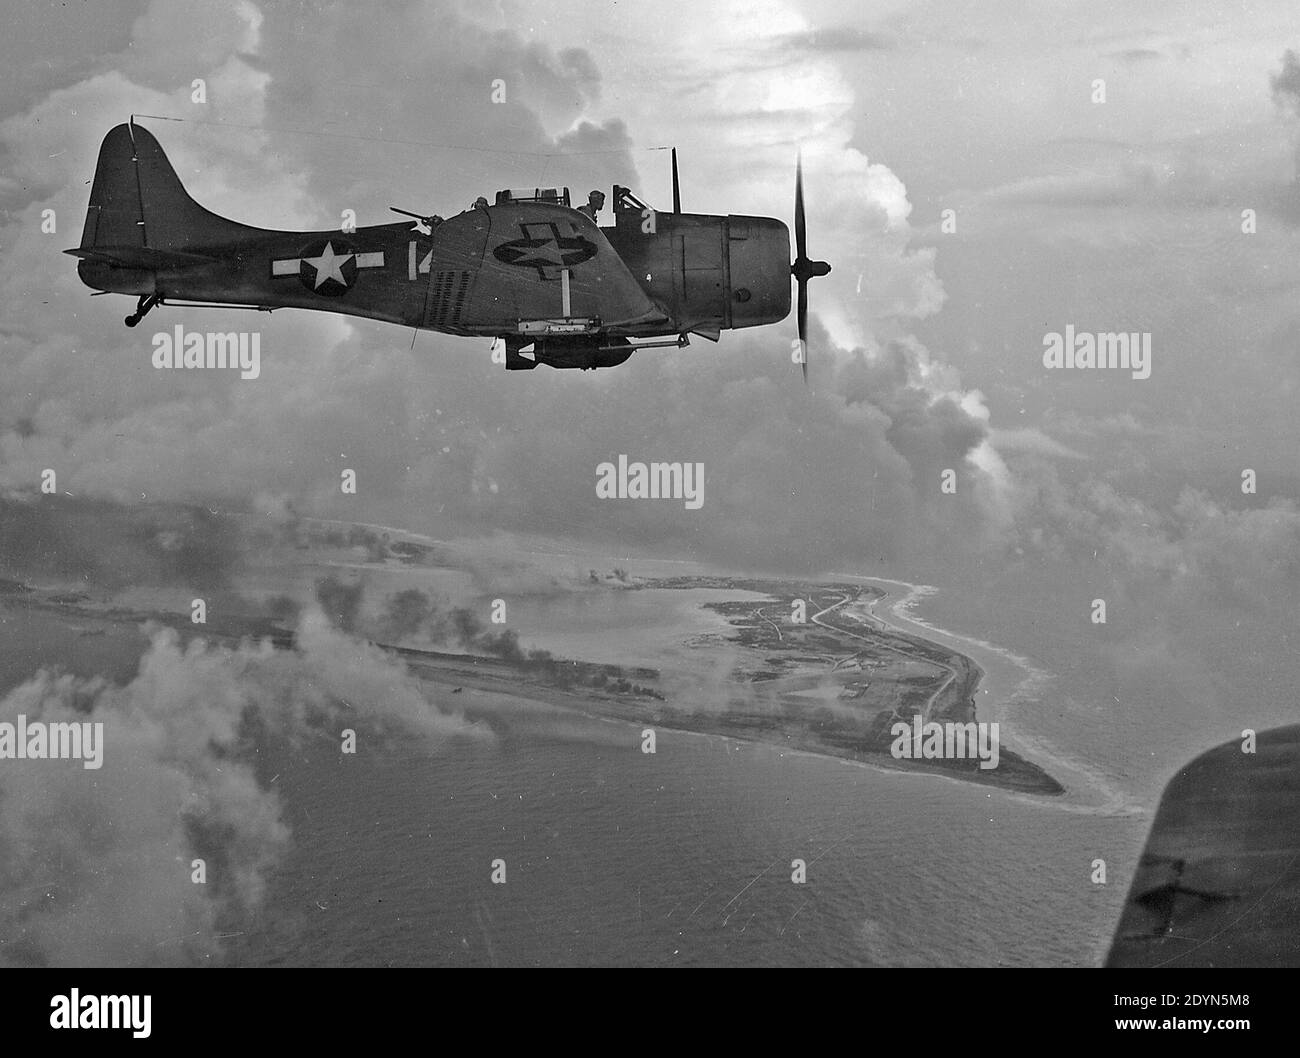 A U.S. Navy Douglas SBD-5 Dauntless dive bomber of Bombing Squadron 5 (VB-5) from the aircraft carrier USS Yorktown (CV-10) over Wake Island, 5 or 6 October 1943 Stock Photo